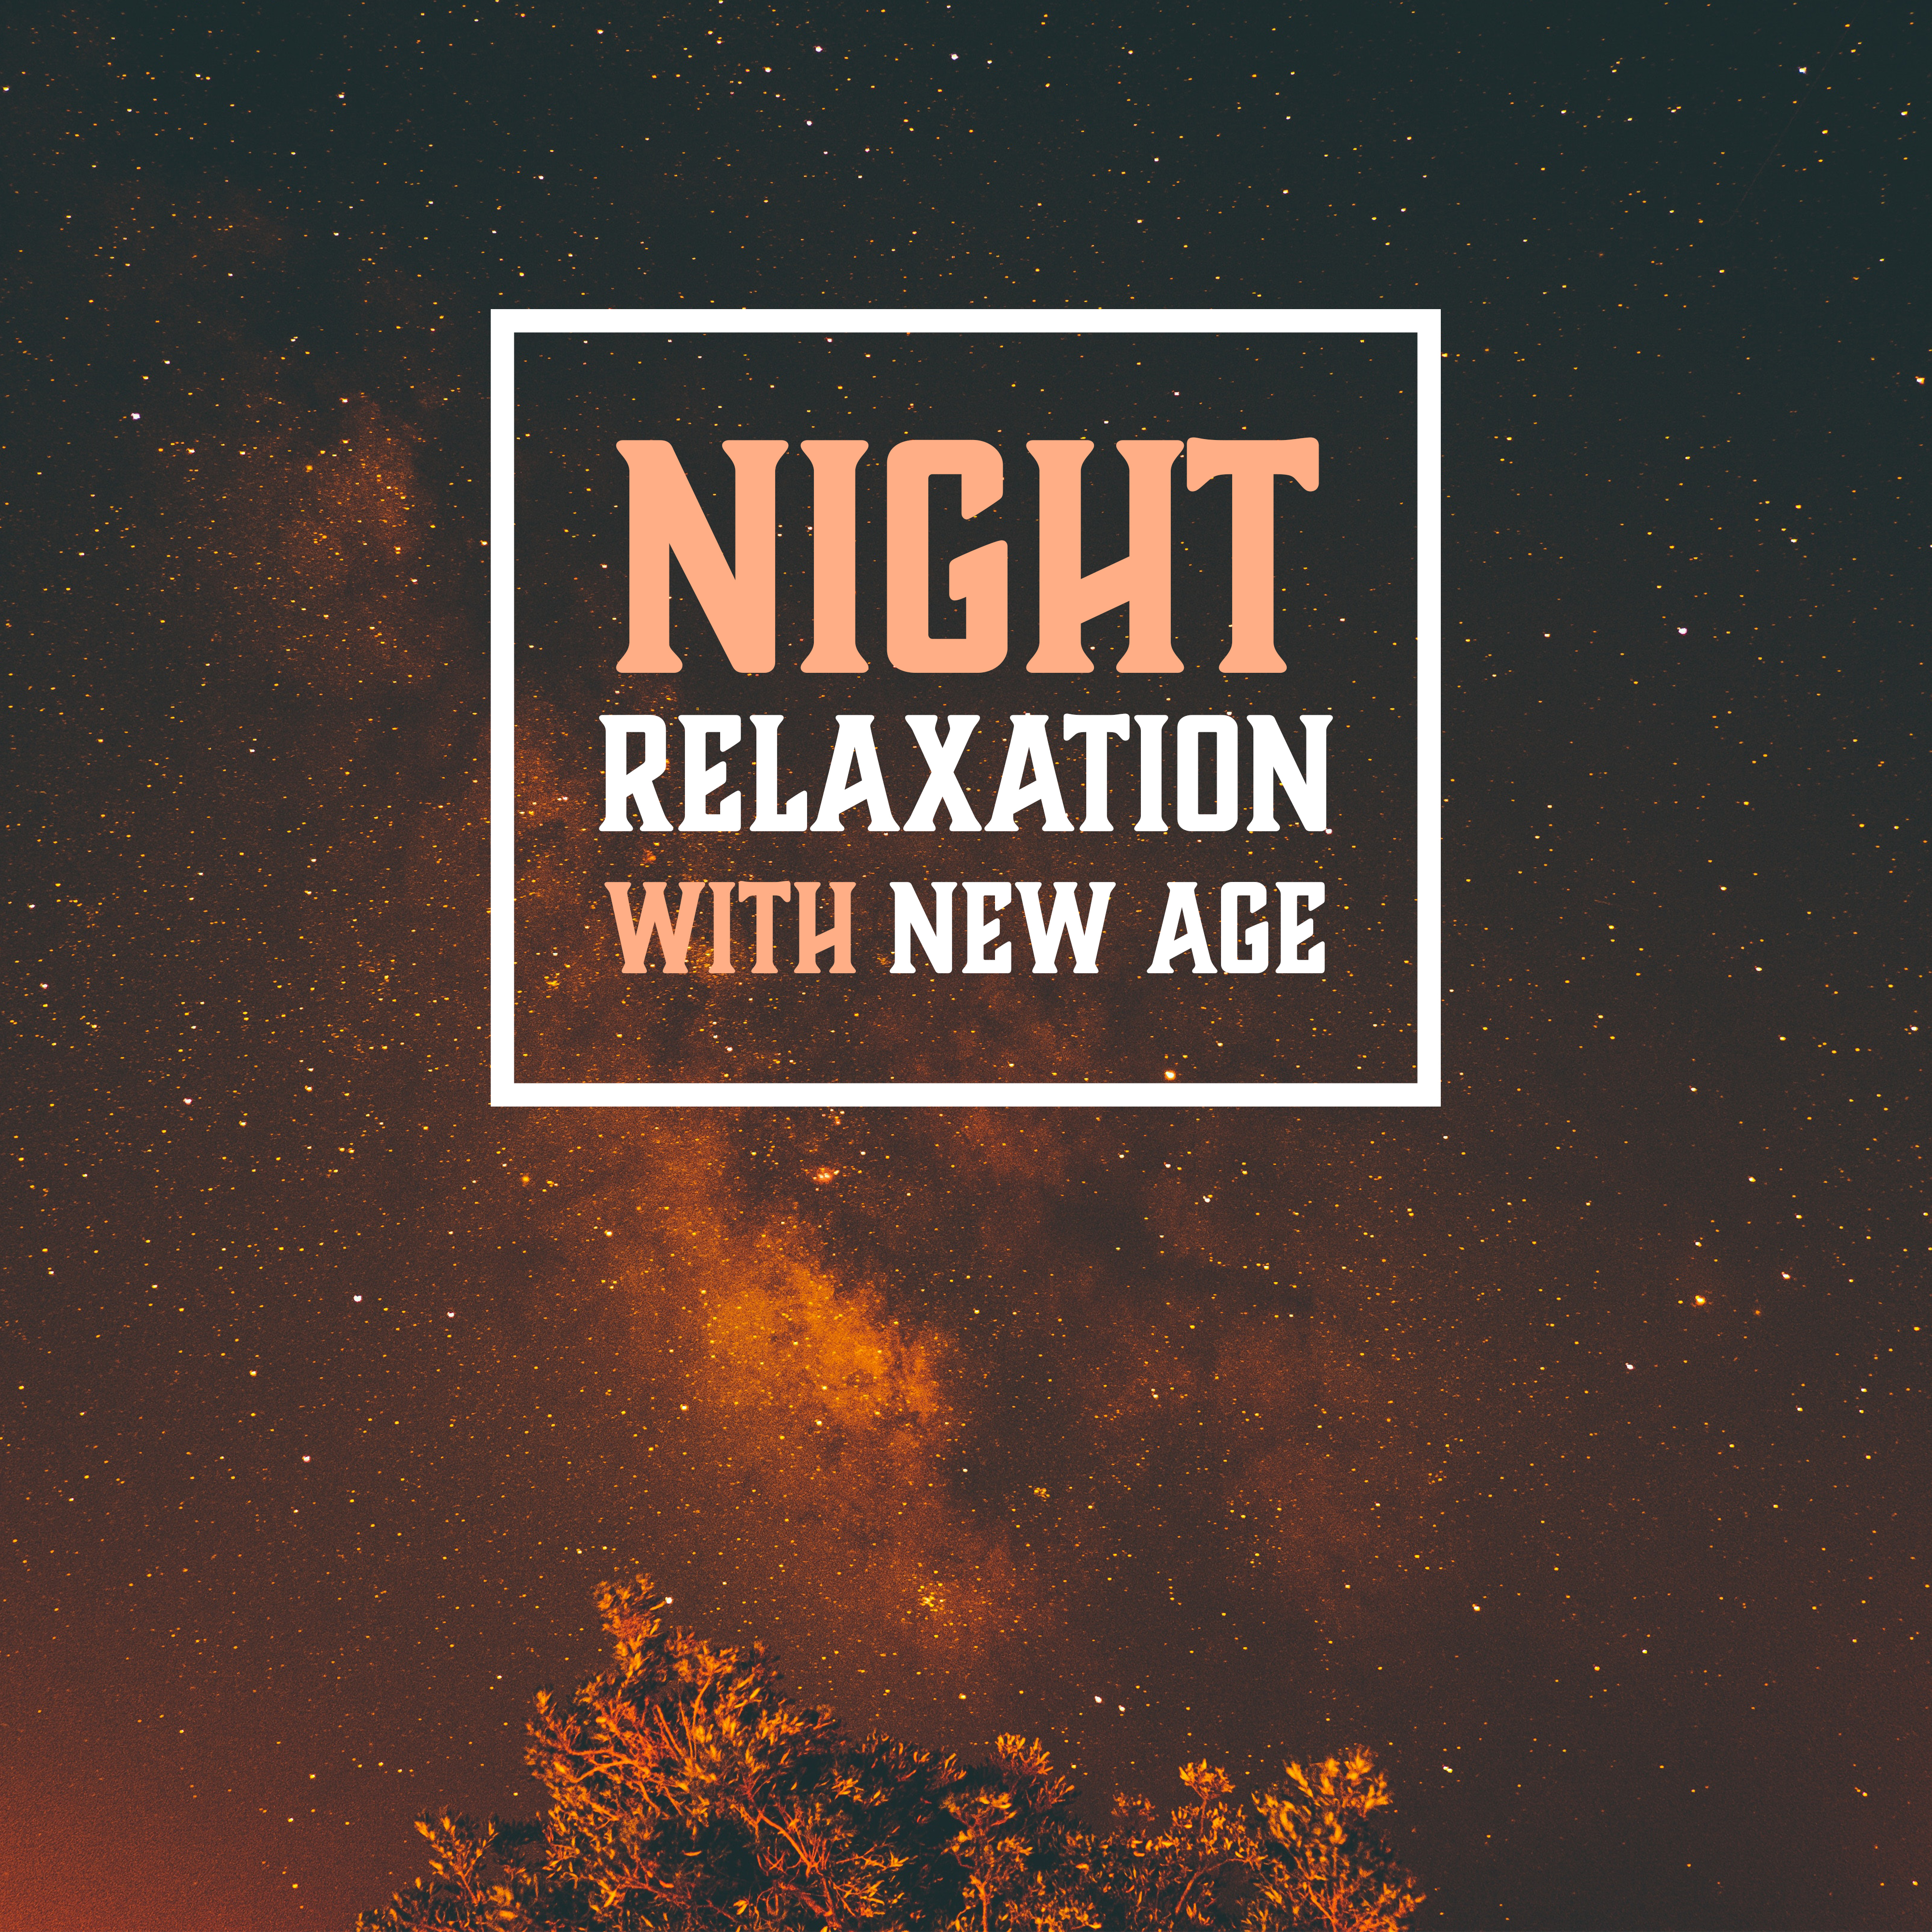 Night Relaxation with New Age – Calming Song for Night, Rest a Bit, Healing Waves, Sleeping Hours, Sweet Dreaming